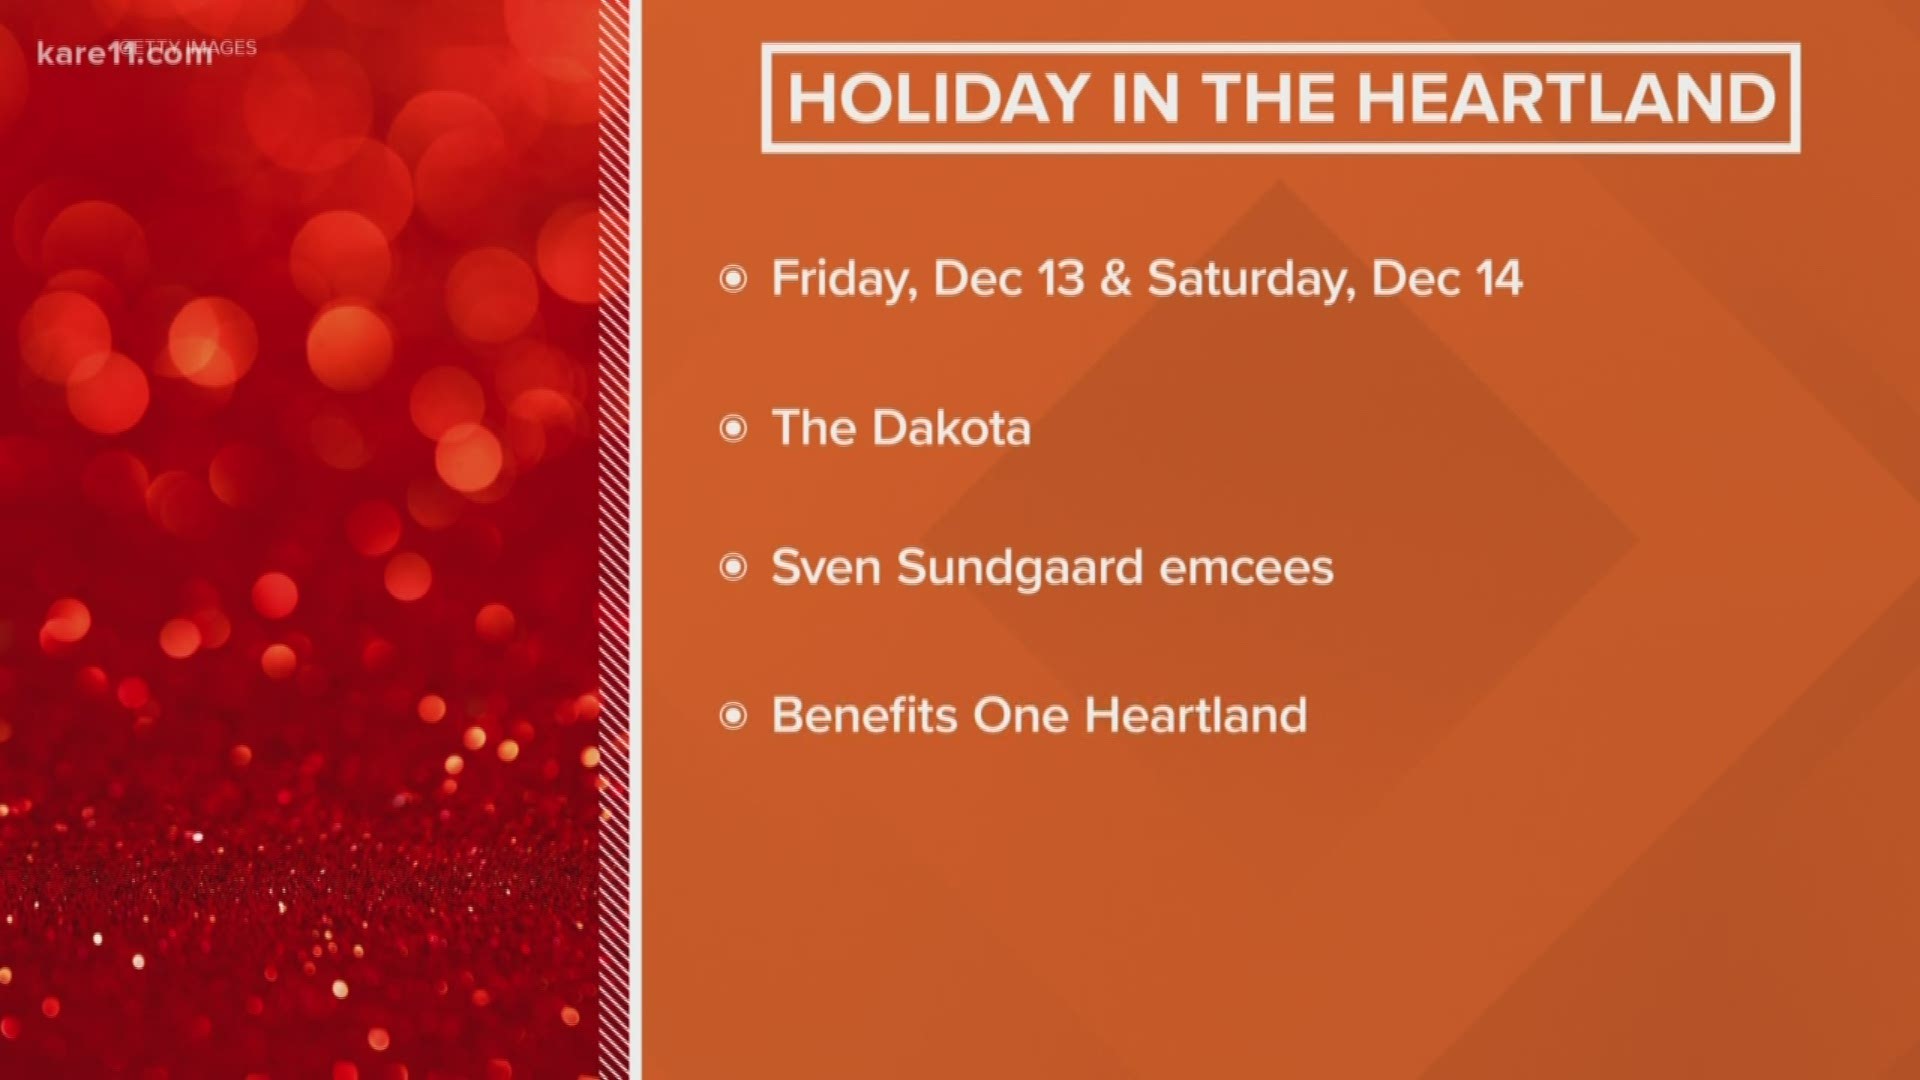 "Holiday in the Heartland" is an annual gala at the Dakota Jazz Club in Minneapolis. It benefits One Heartland. Sven Sundgaard emcees Friday and Saturday nights.